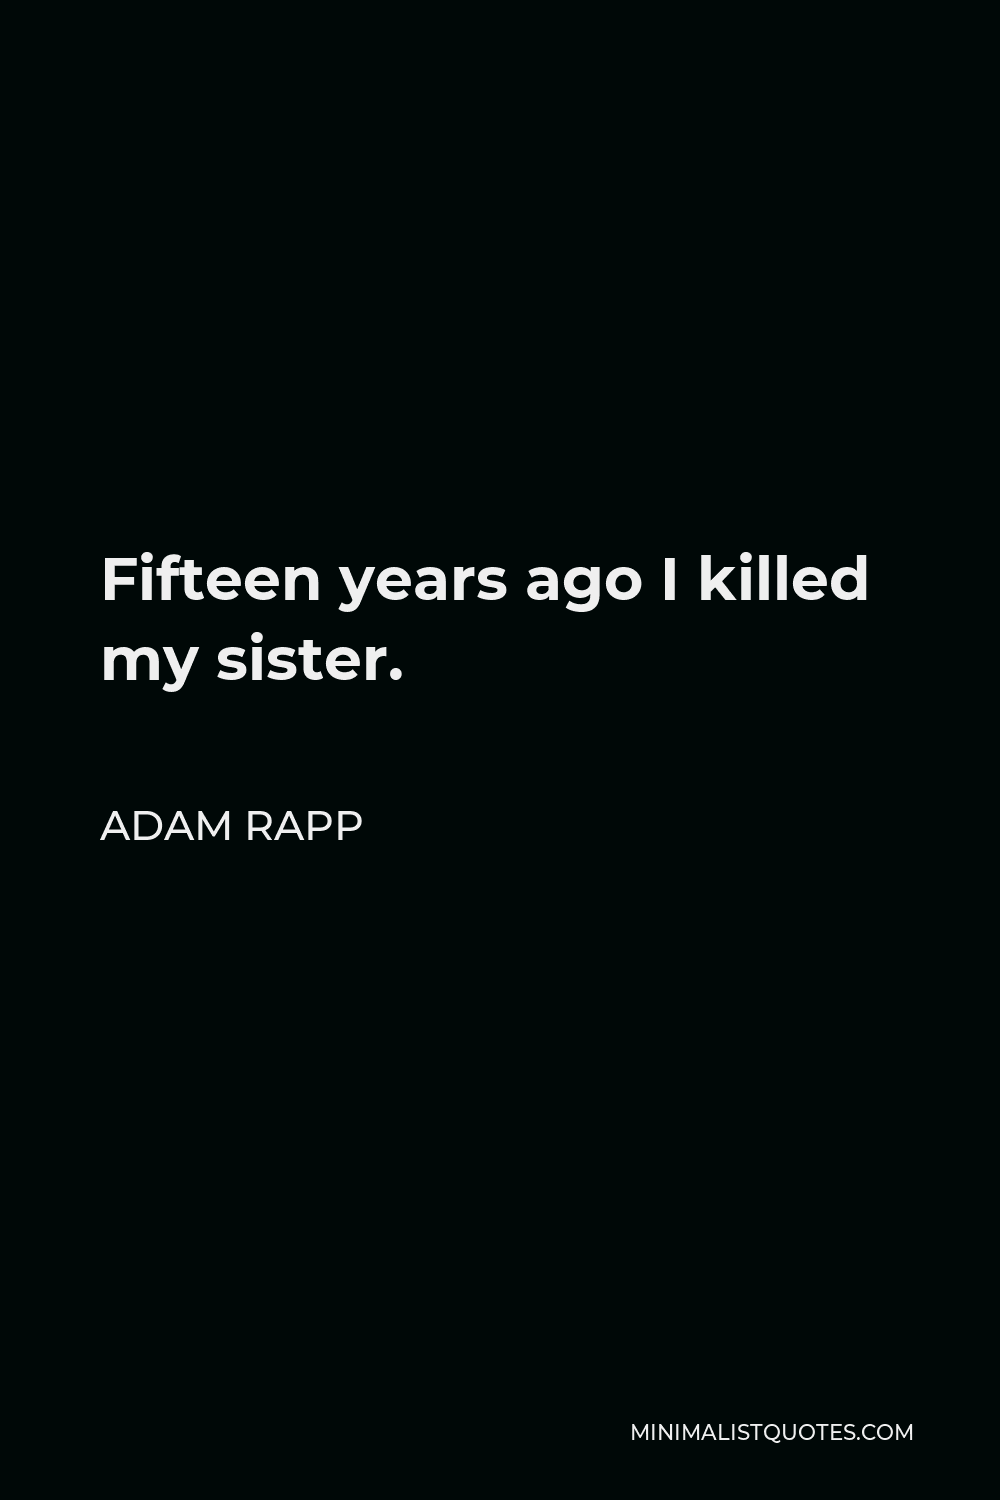 Adam Rapp Quote - Fifteen years ago I killed my sister.